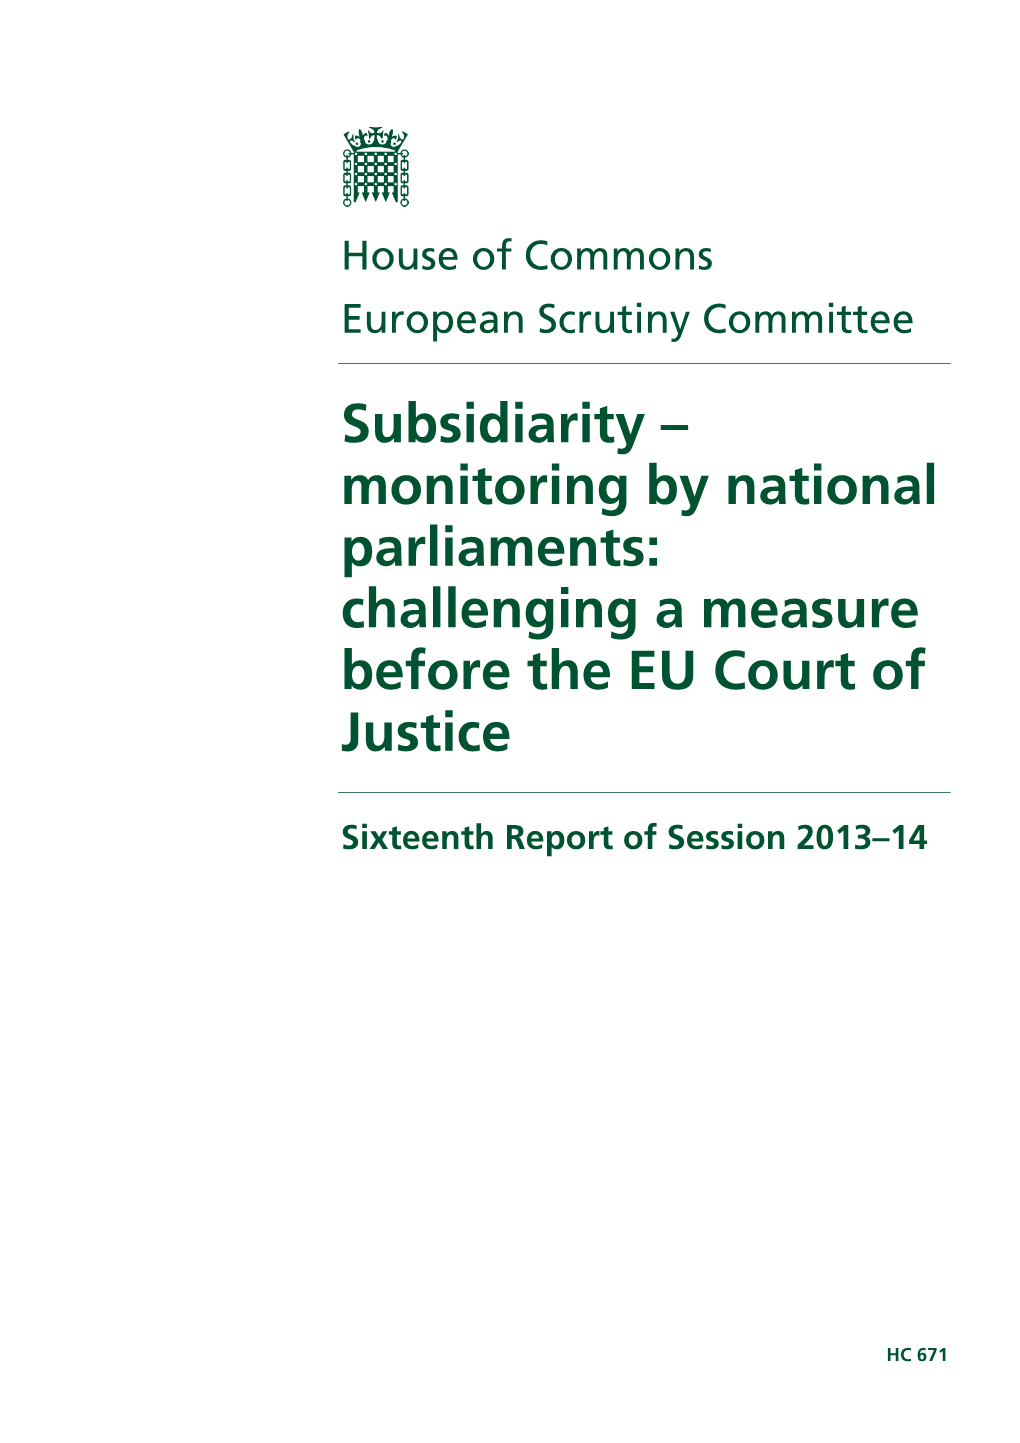 Subsidiarity – Monitoring by National Parliaments: Challenging a Measure Before the EU Court of Justice